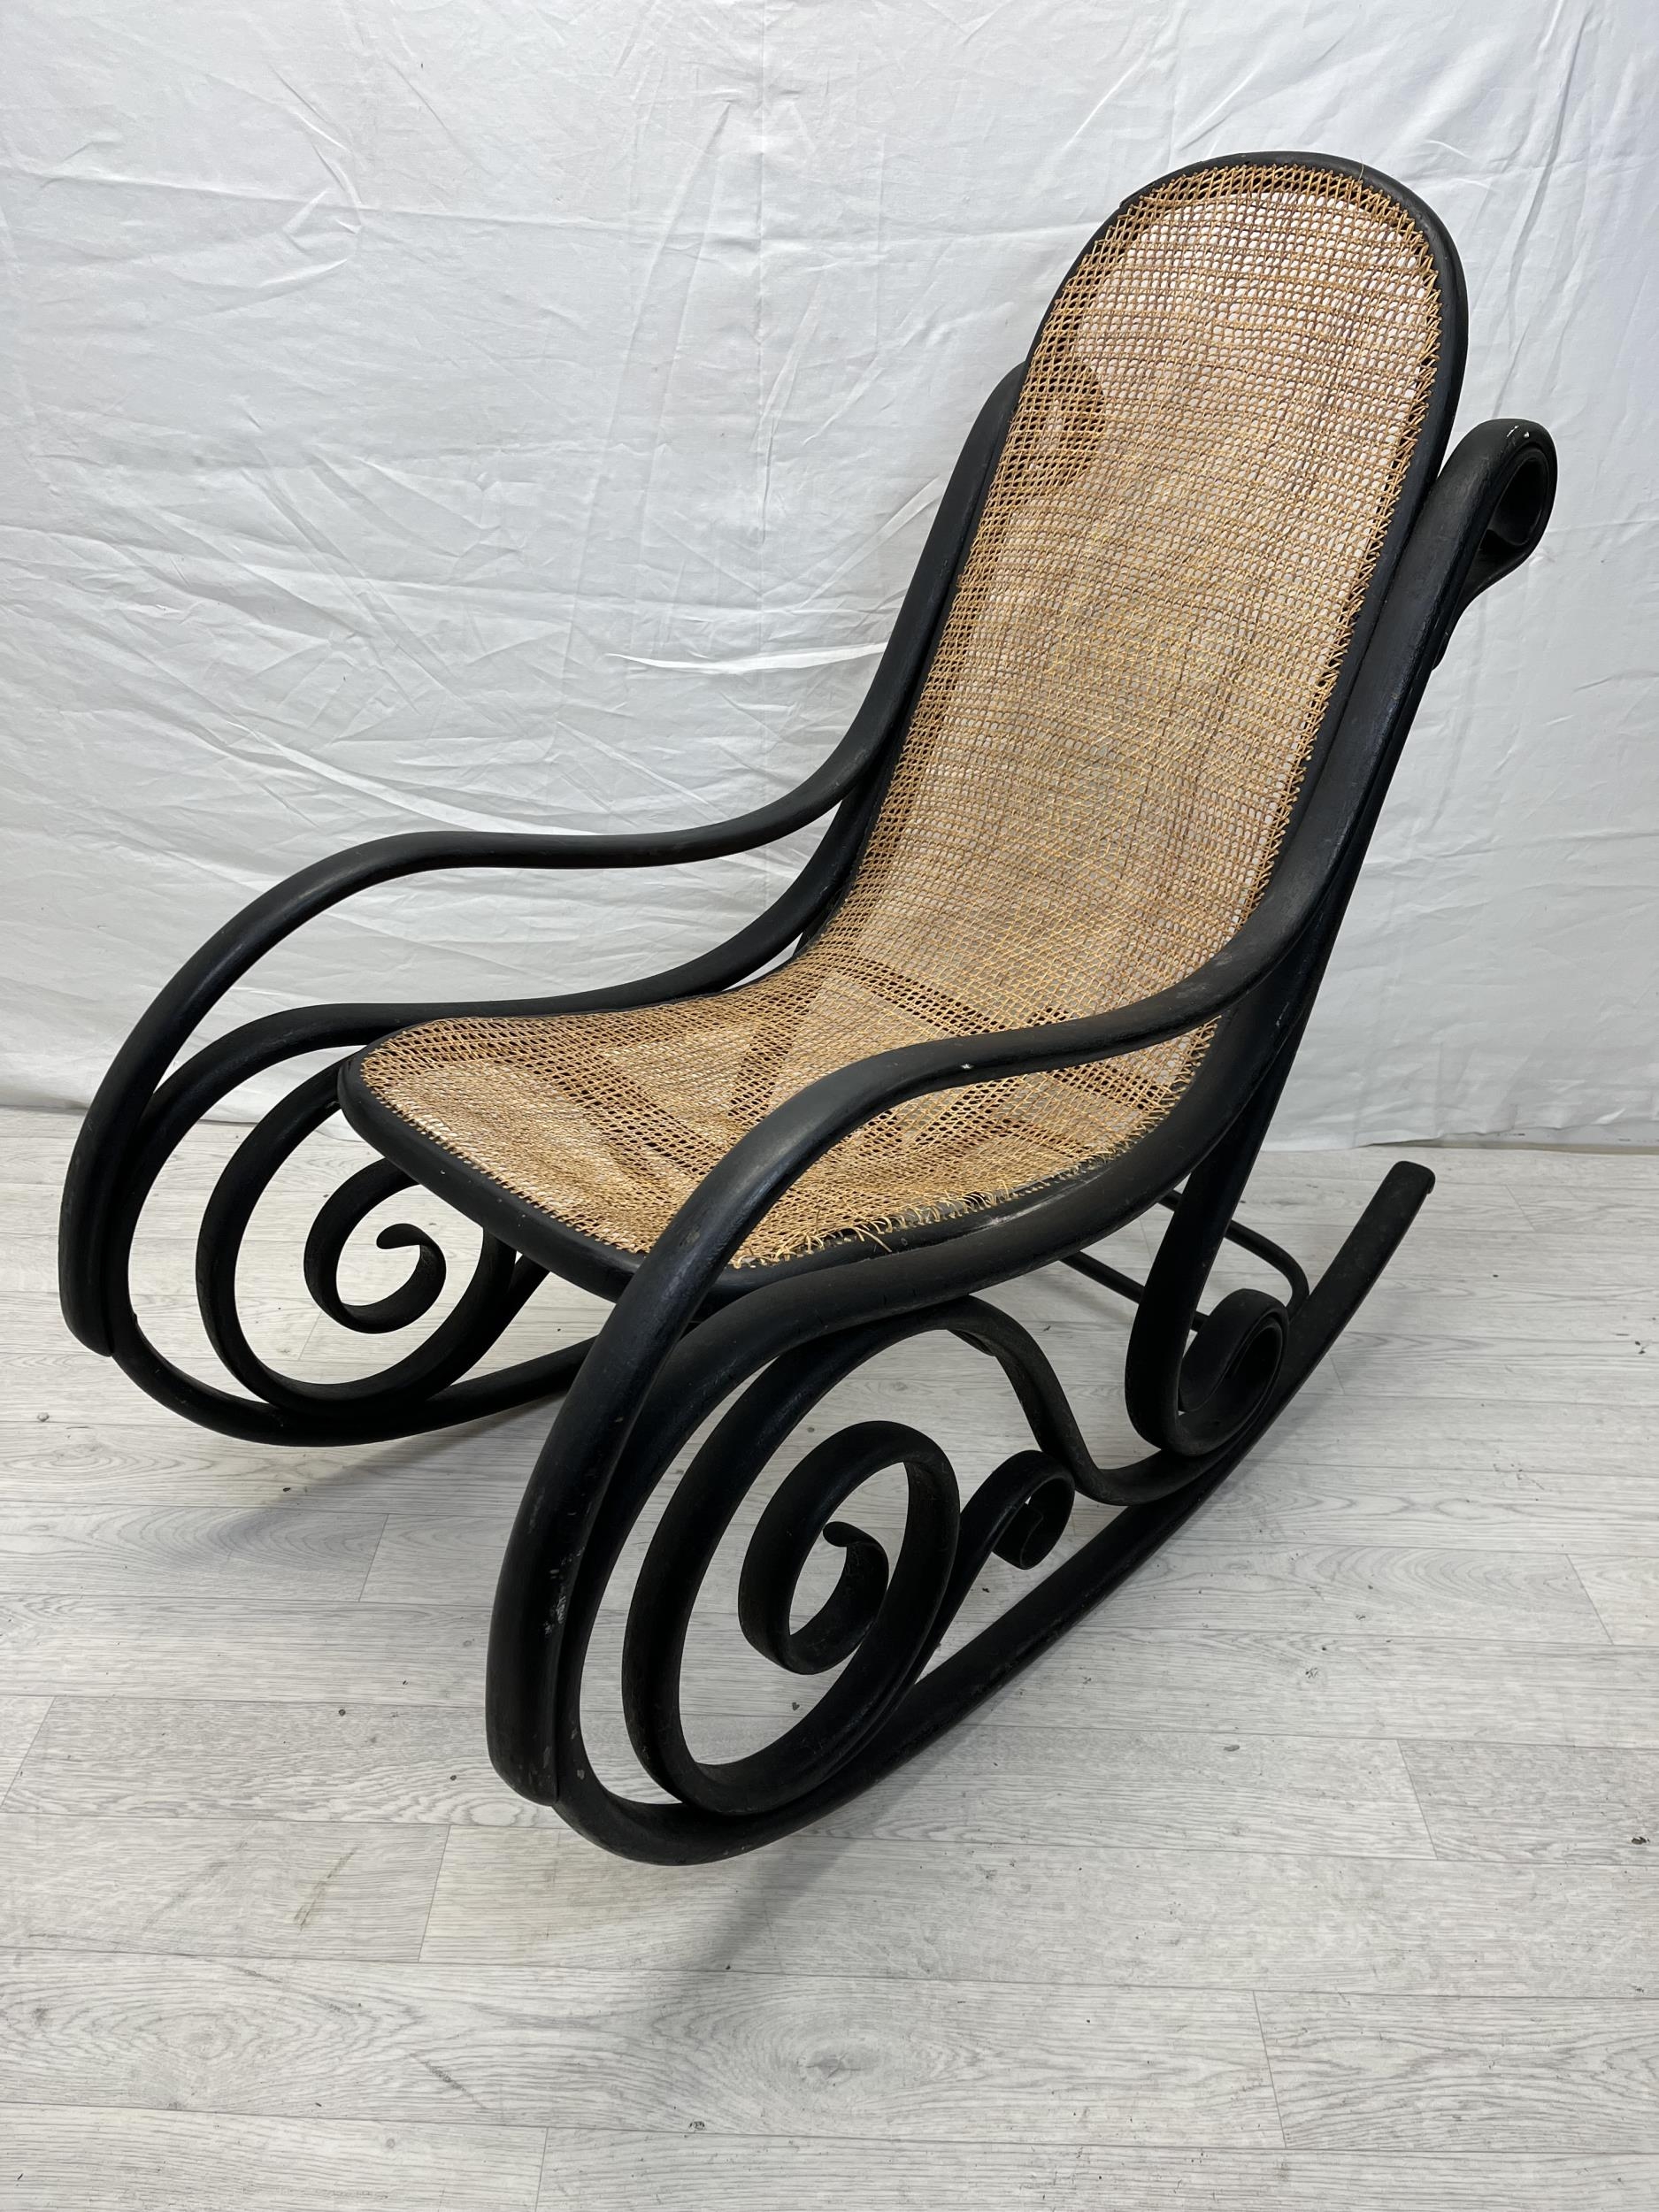 Rocking chair, 19th century Thonet style bentwood with caned seat. H.102cm. - Image 3 of 4